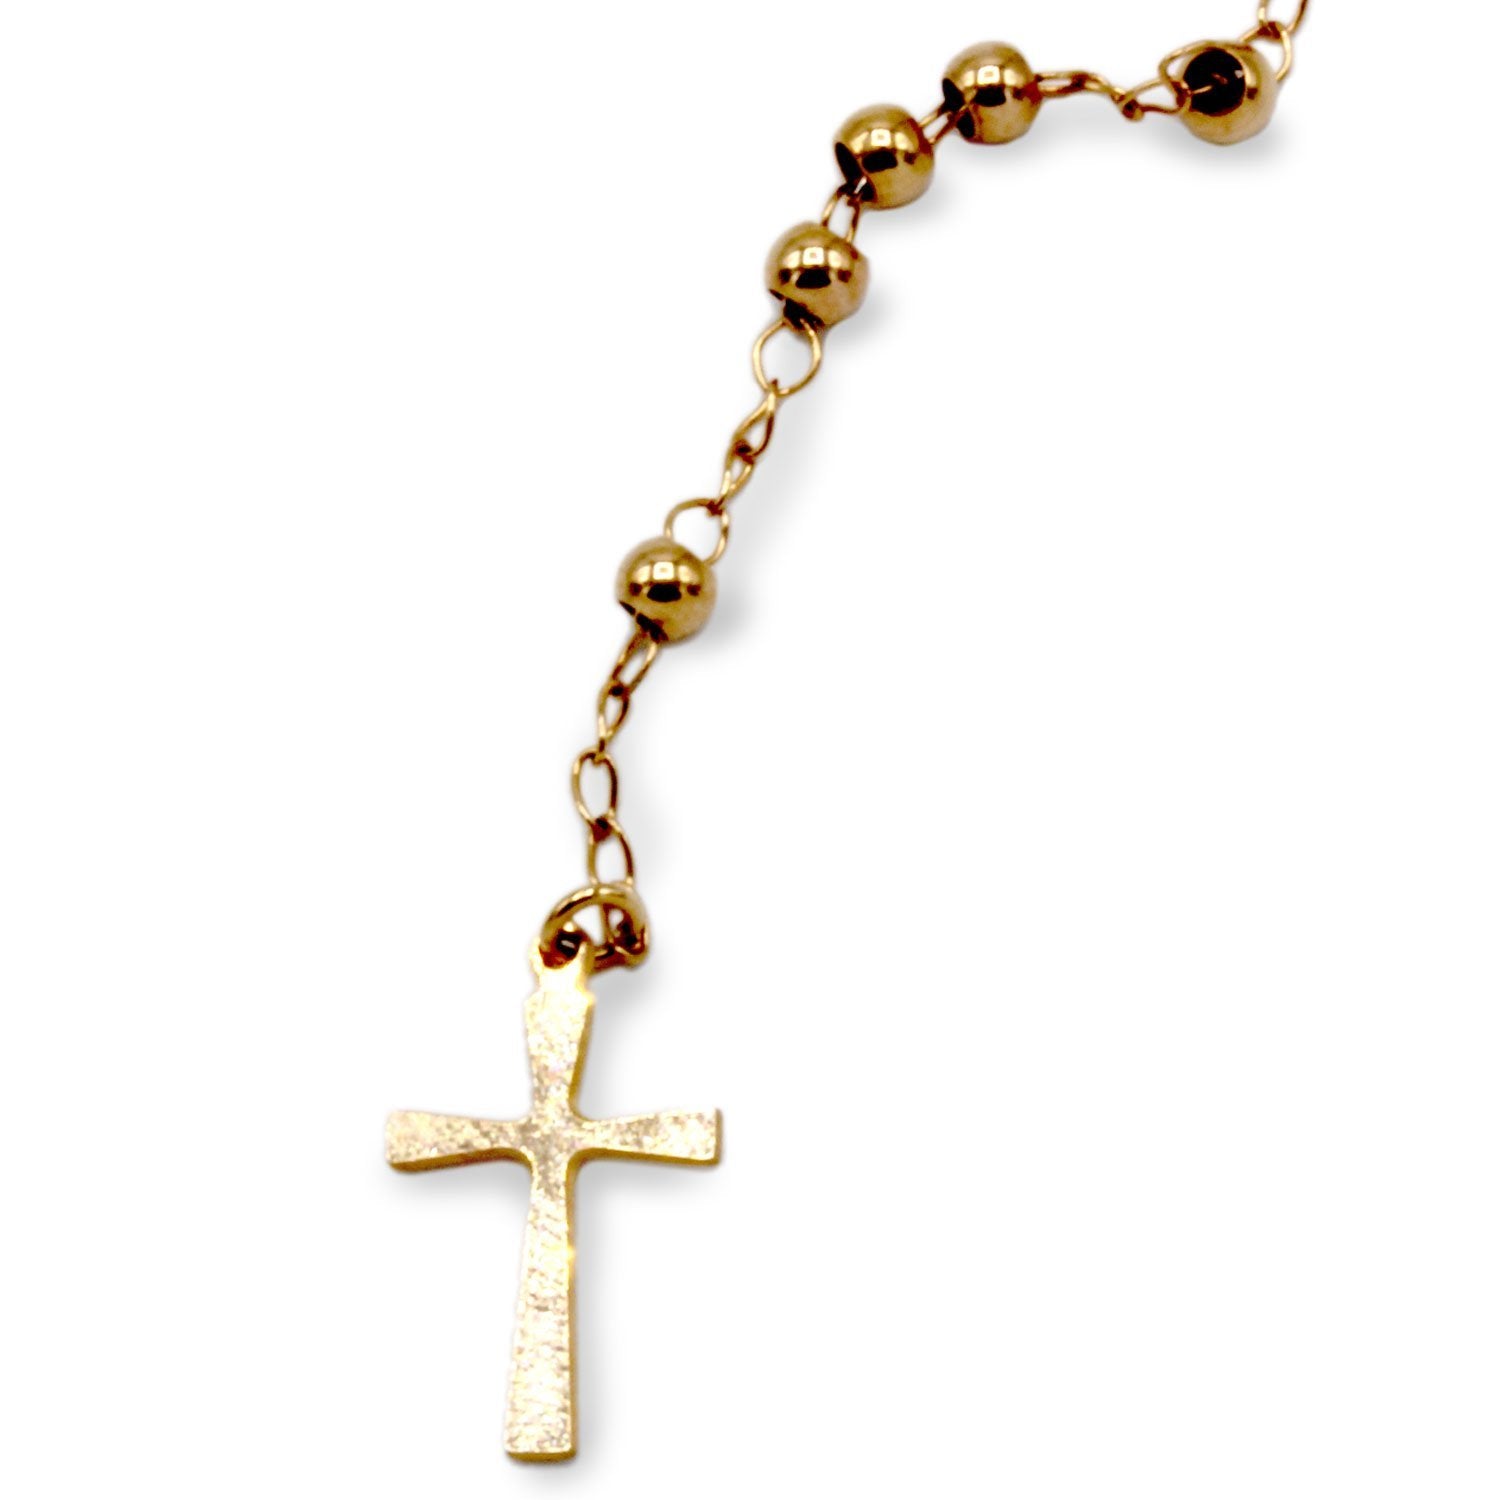 Traditional Rose Gold Rosary Necklace Five Decade Catholic Prayer Beads 3mm